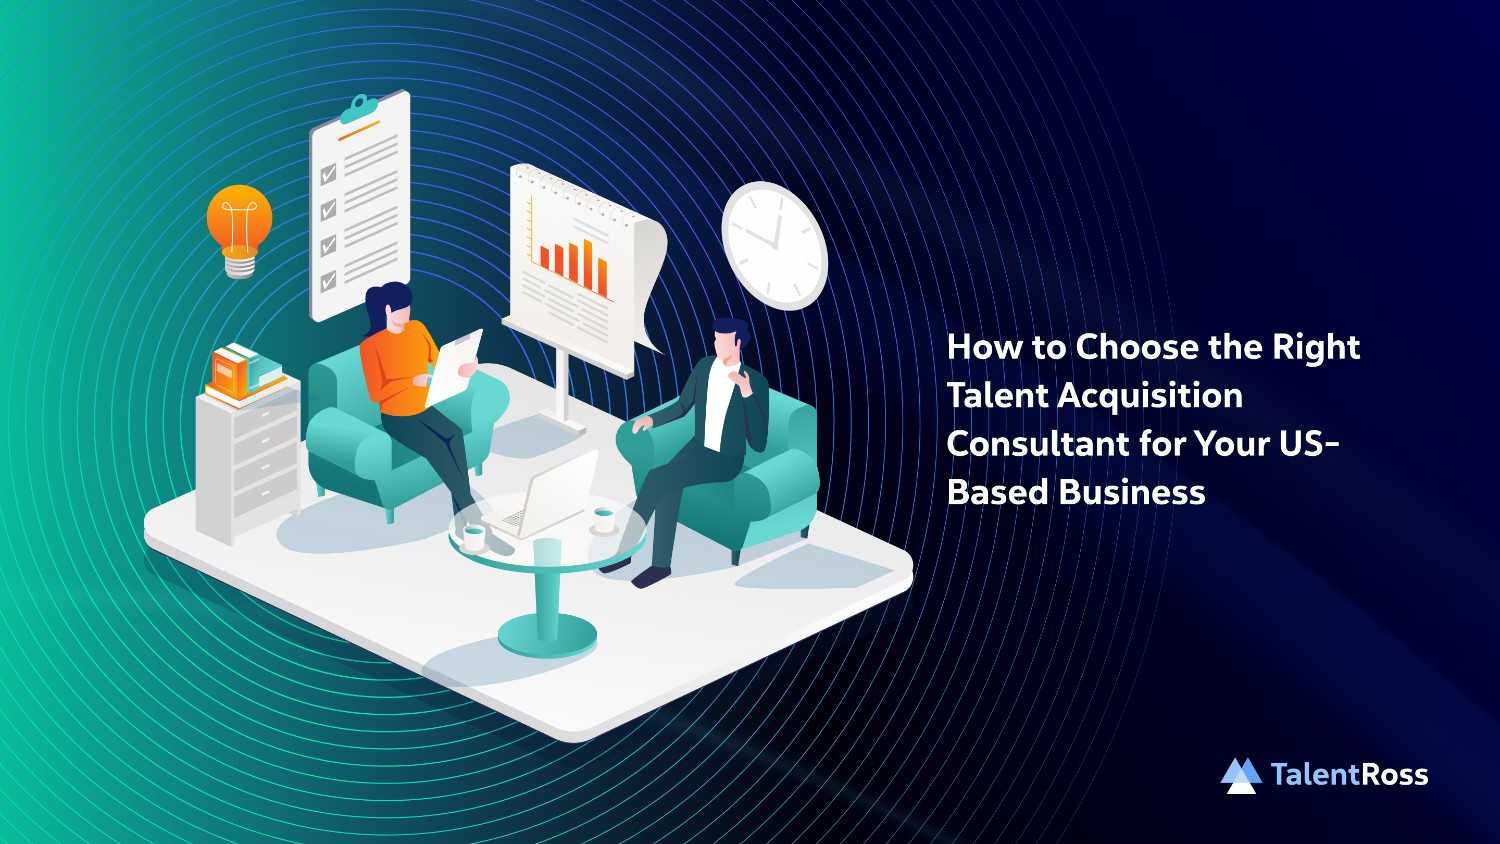 How to Choose the Right Talent Acquisition Consultant for Your US